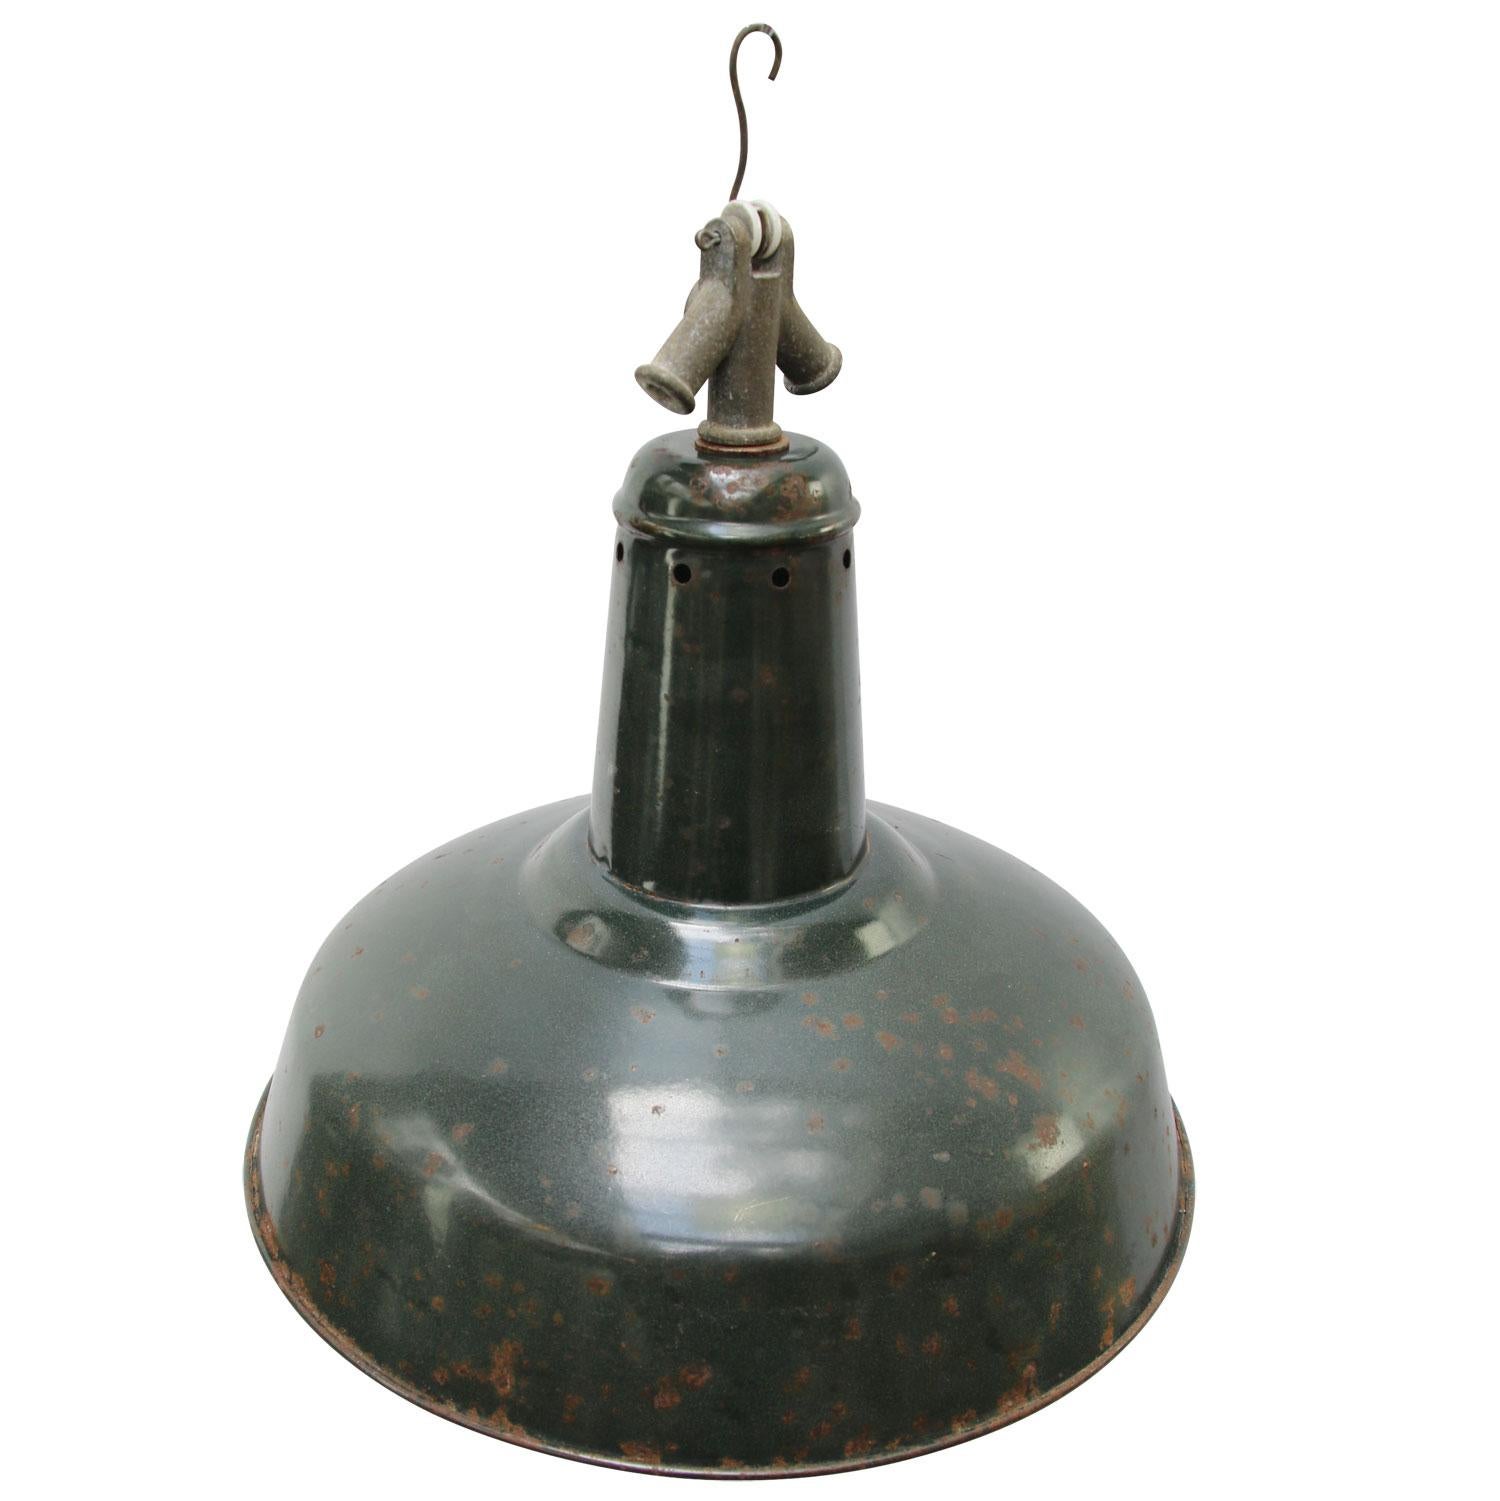 Factory hanging light
black green enamel, white interior

Weight: 1.50 kg / 3.3 lb

Priced per individual item. All lamps have been made suitable by international standards for incandescent light bulbs, energy-efficient and LED bulbs. E26/E27